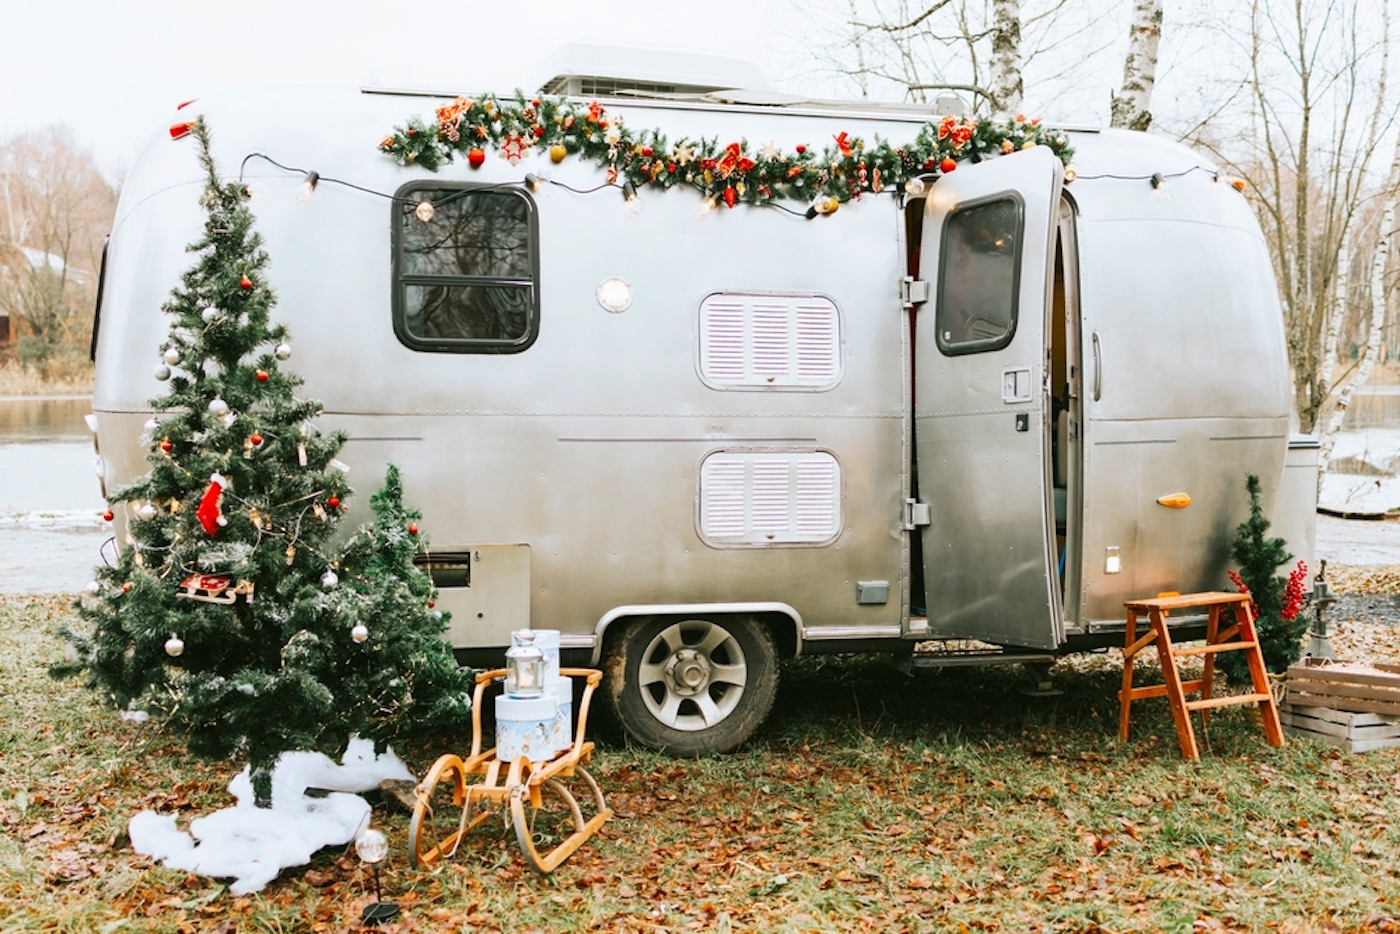 Small Airstream travel trailer decorated for the holidays with a small Christmas tree and sled with evergreen garlands